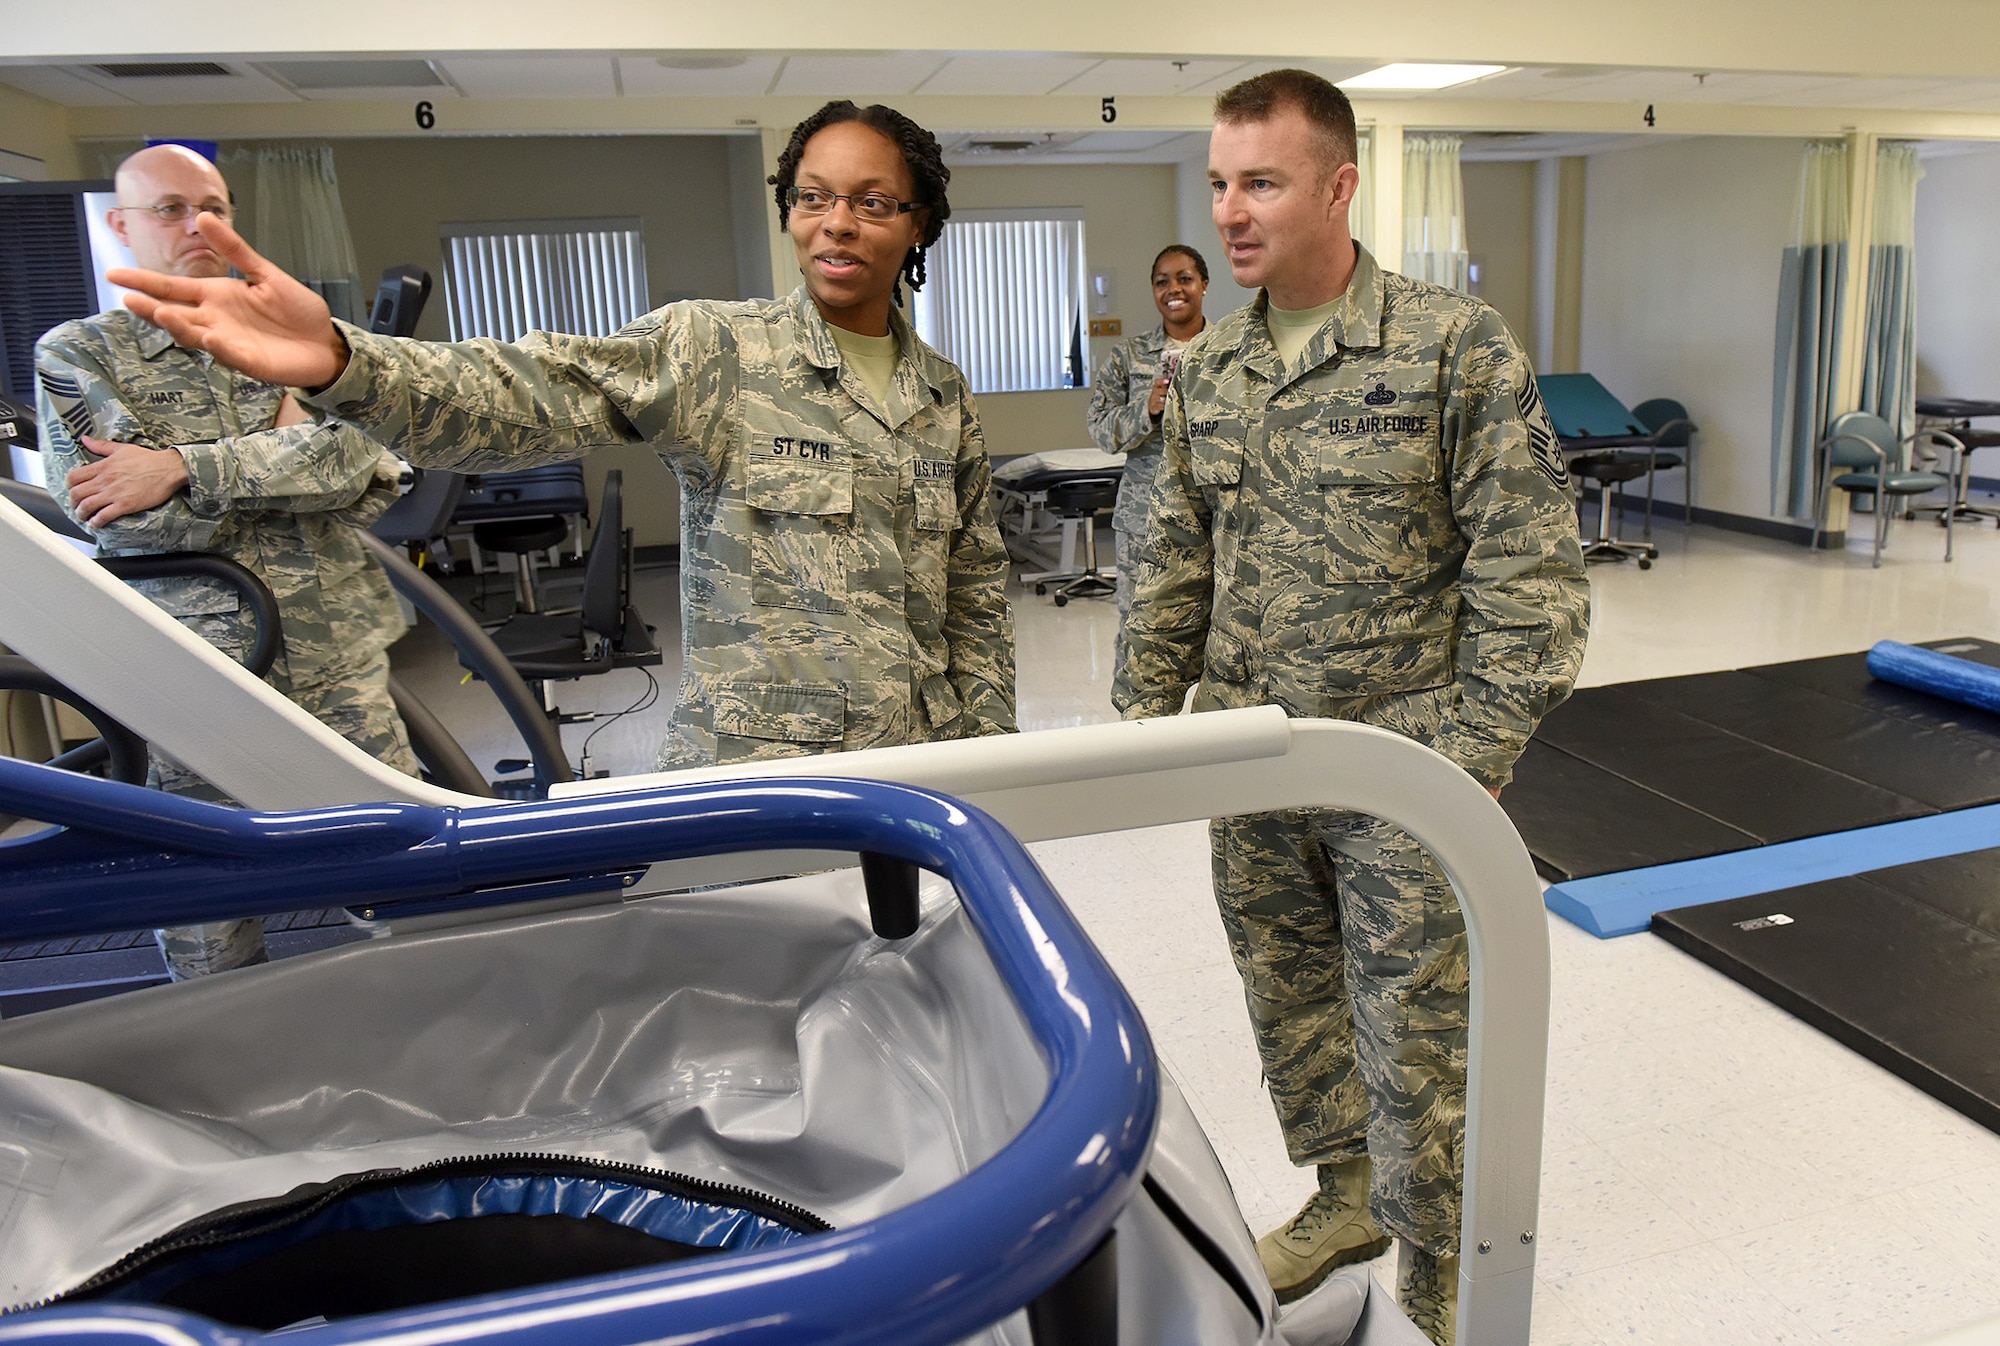 Senior Airman Jessica St. Cyr, 78th Medical Group physical therapist, guides Chief Master Sgt. Gary Sharp, Air Force Sustainment Center command chief, through the unit’s physical therapy section during a recent visit to Robins Air Force Base, Ga.  (U.S. Air Force photos by Tommie Horton